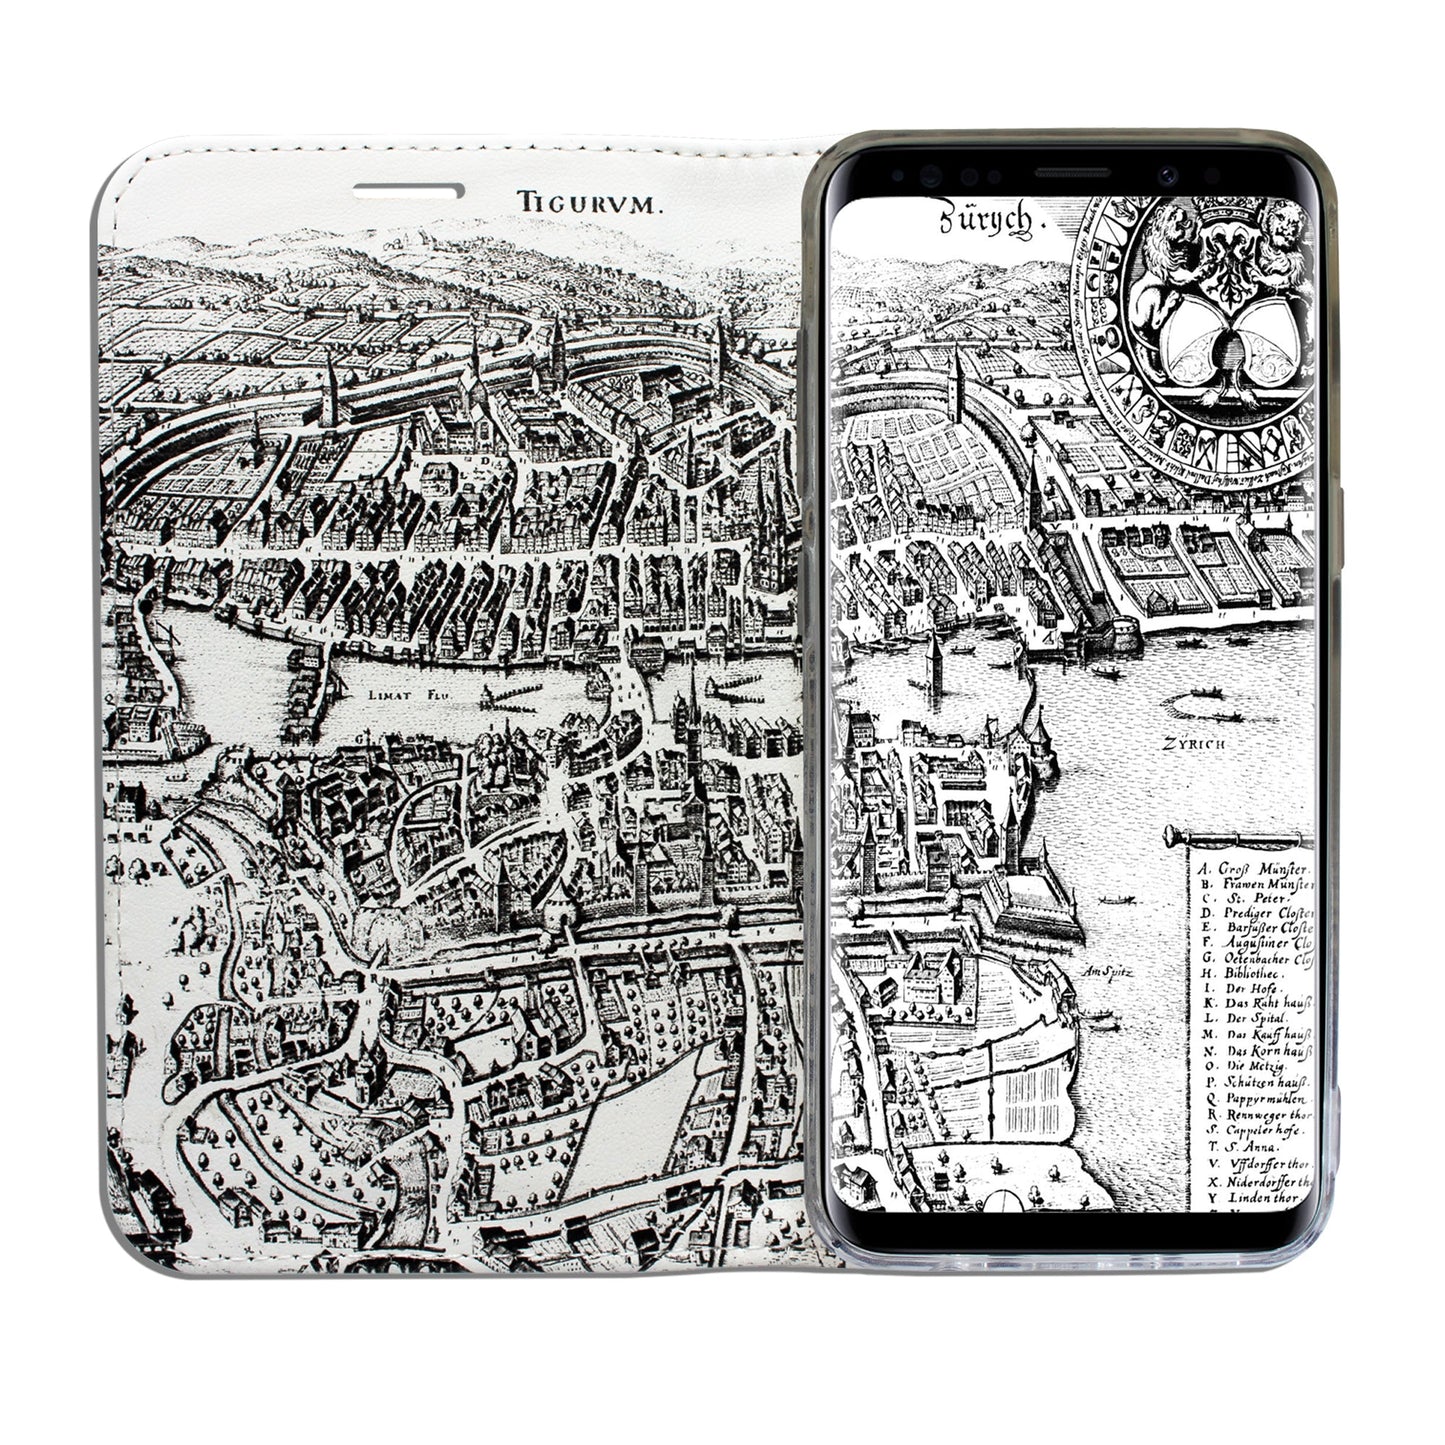 Zurich City from Above Panorama Case for Samsung Galaxy Note 8